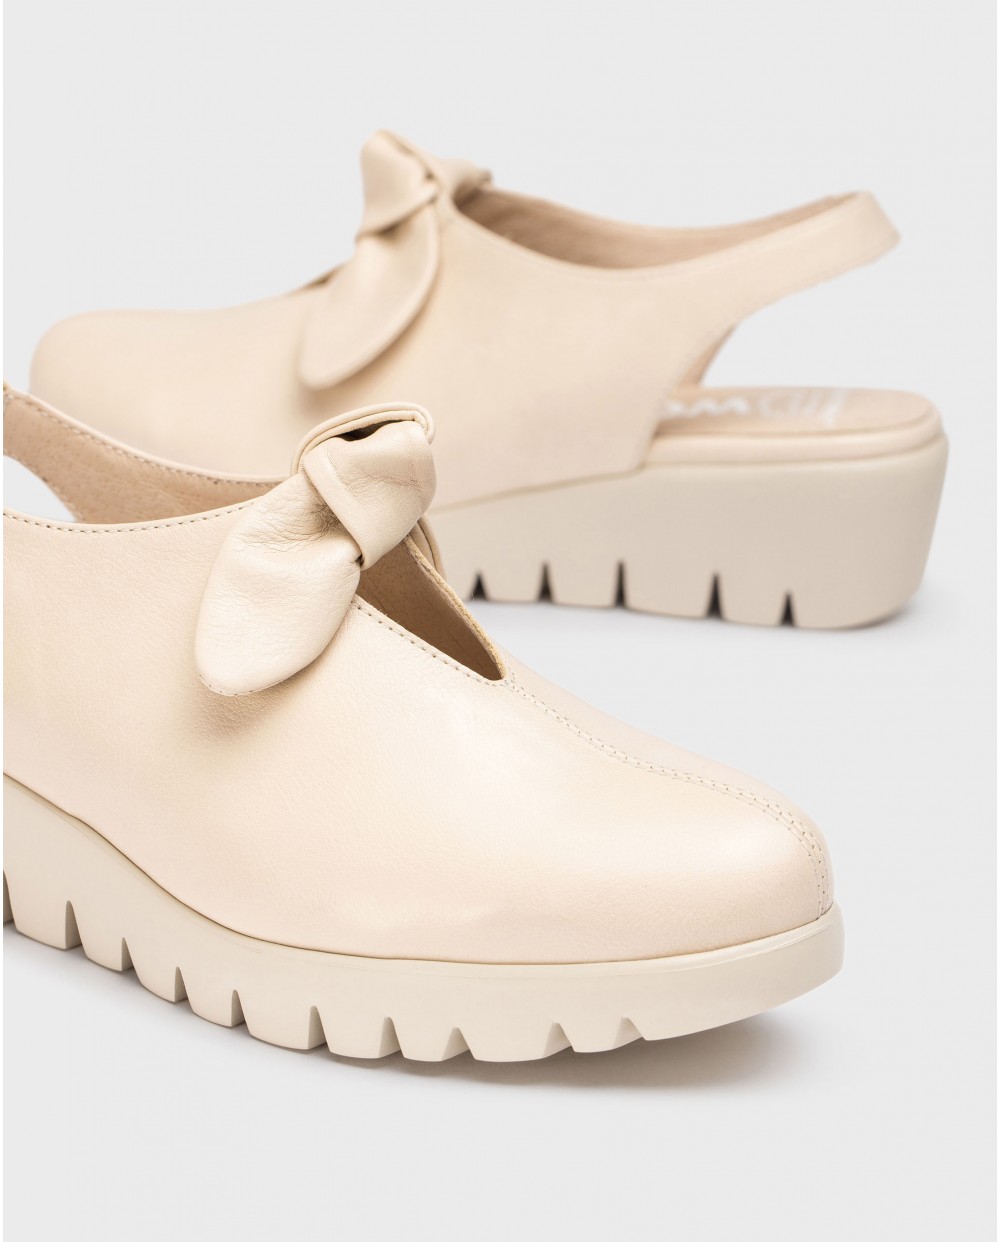 Wonders-Wedges-Natural shoes with bow detail